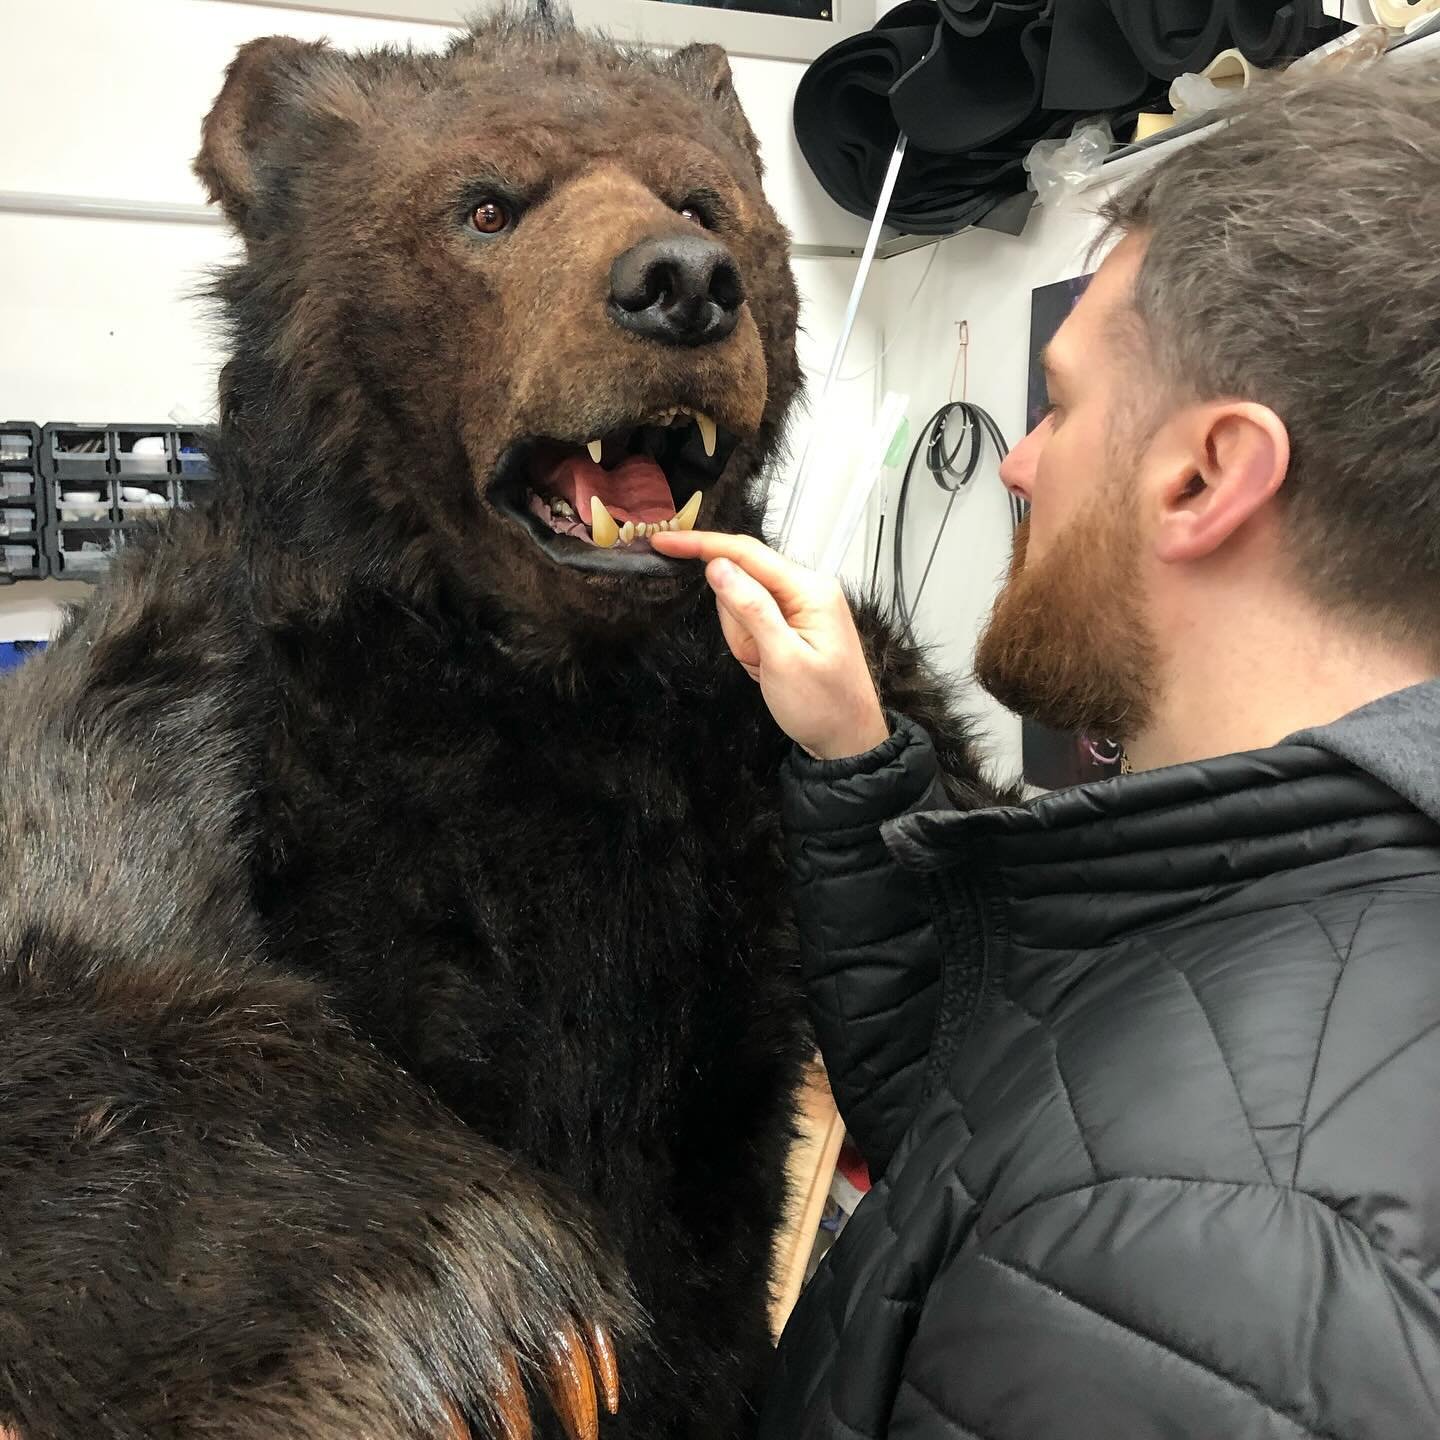 We&rsquo;ve had Bears on the brain for the last 7 weeks.. 🐻 

He&rsquo;s a look at our last grizzly produced for @bbcghosts a few years back 🐾 fab job with a fab team.

#puppetprops #puppetmaking #puppetmakers #bear #grizzly #faketaxidermy